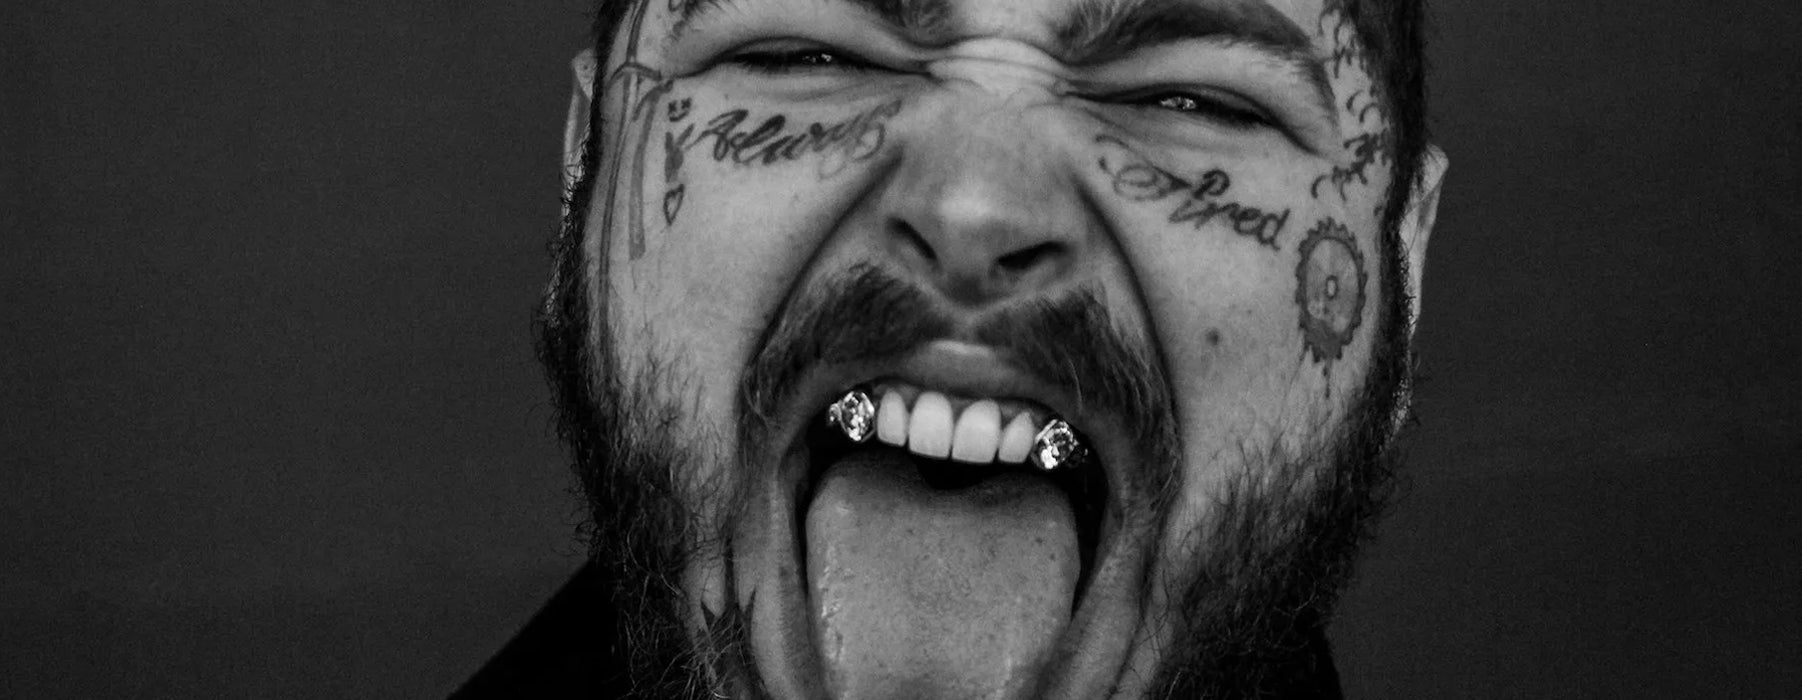 Tooth gems post malone wearing gold grillz